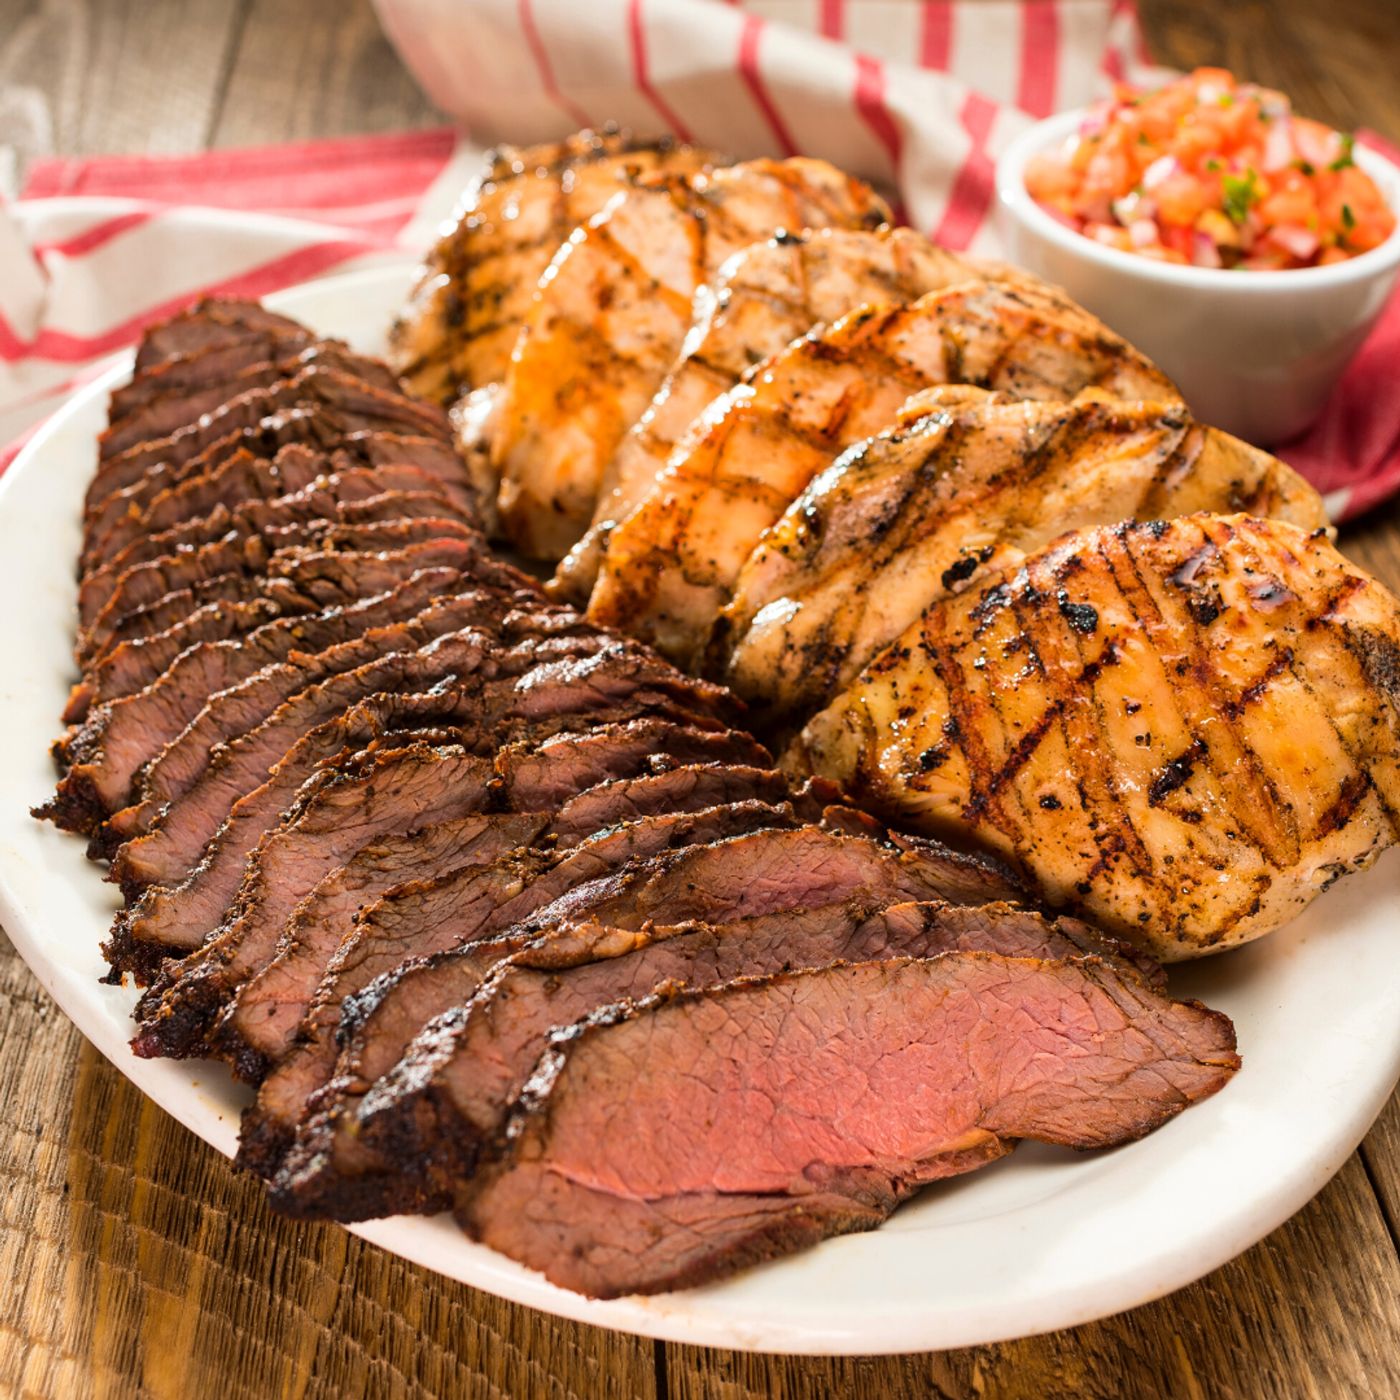 photo of sliced steak and grilled chicken combo